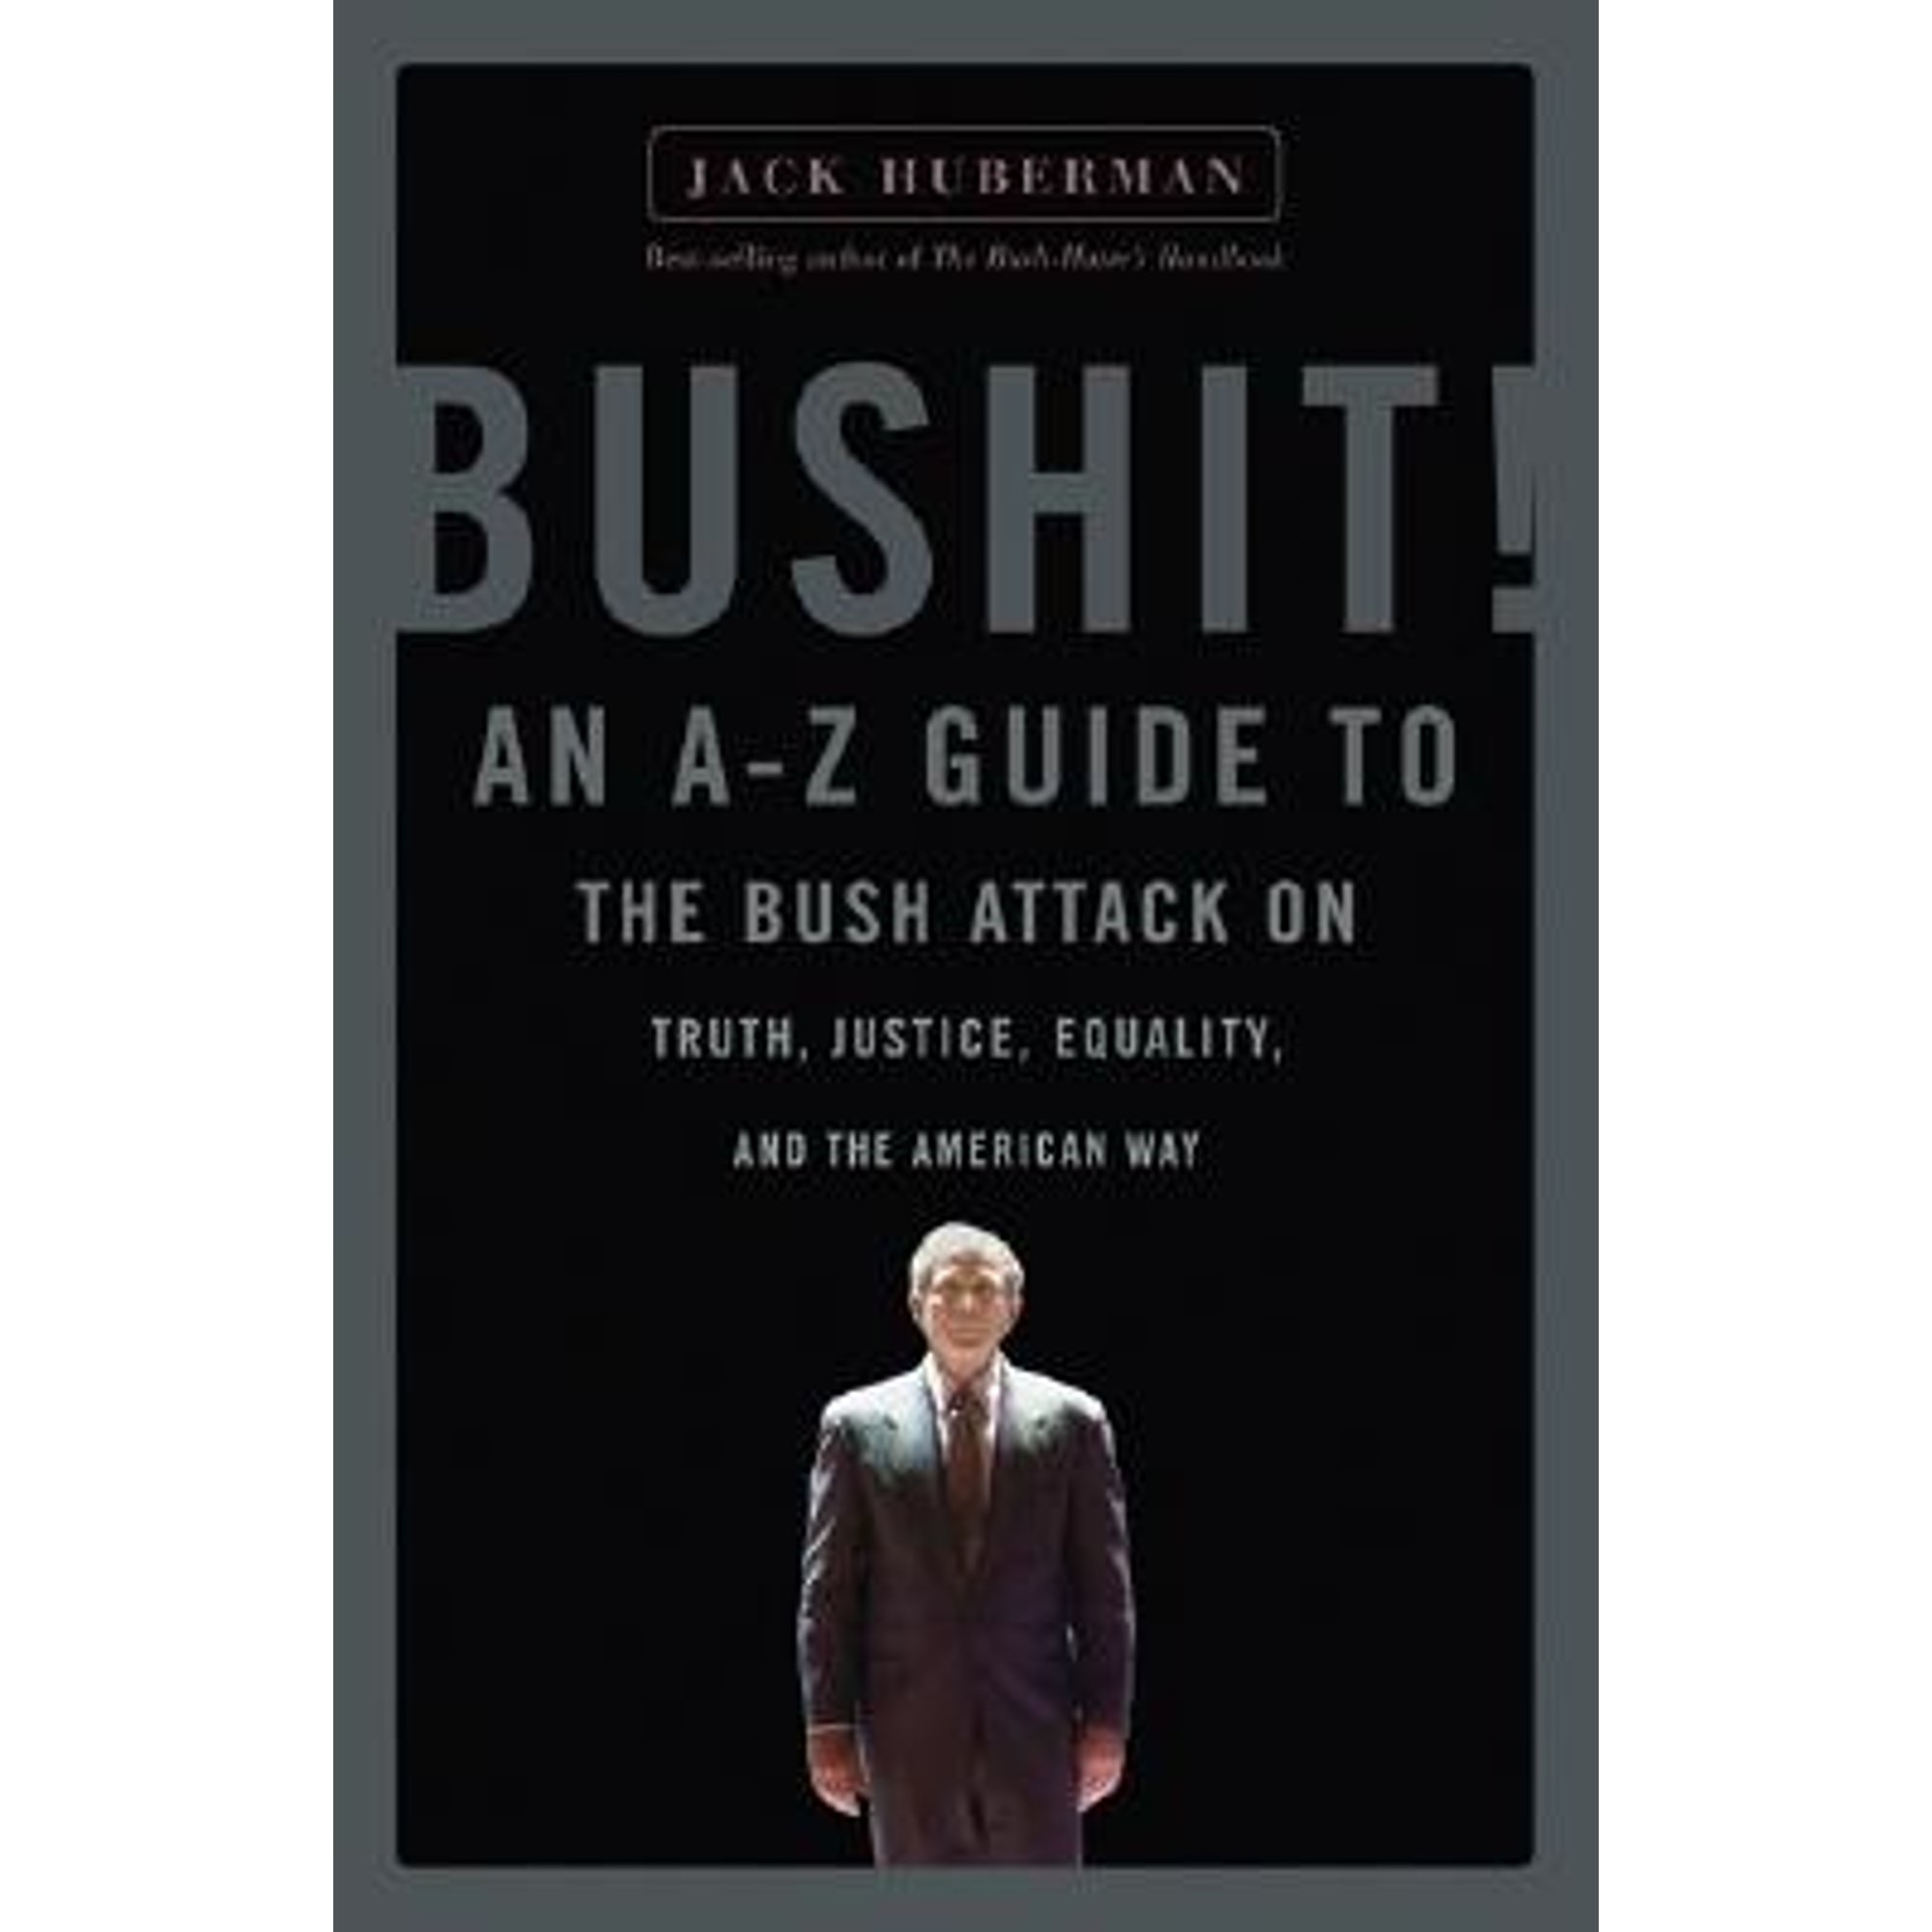 Bushit : An A-Z Guide to the Bush Attack on Truth, Justice, Equality and the American Way (Paperback) - image 1 of 1